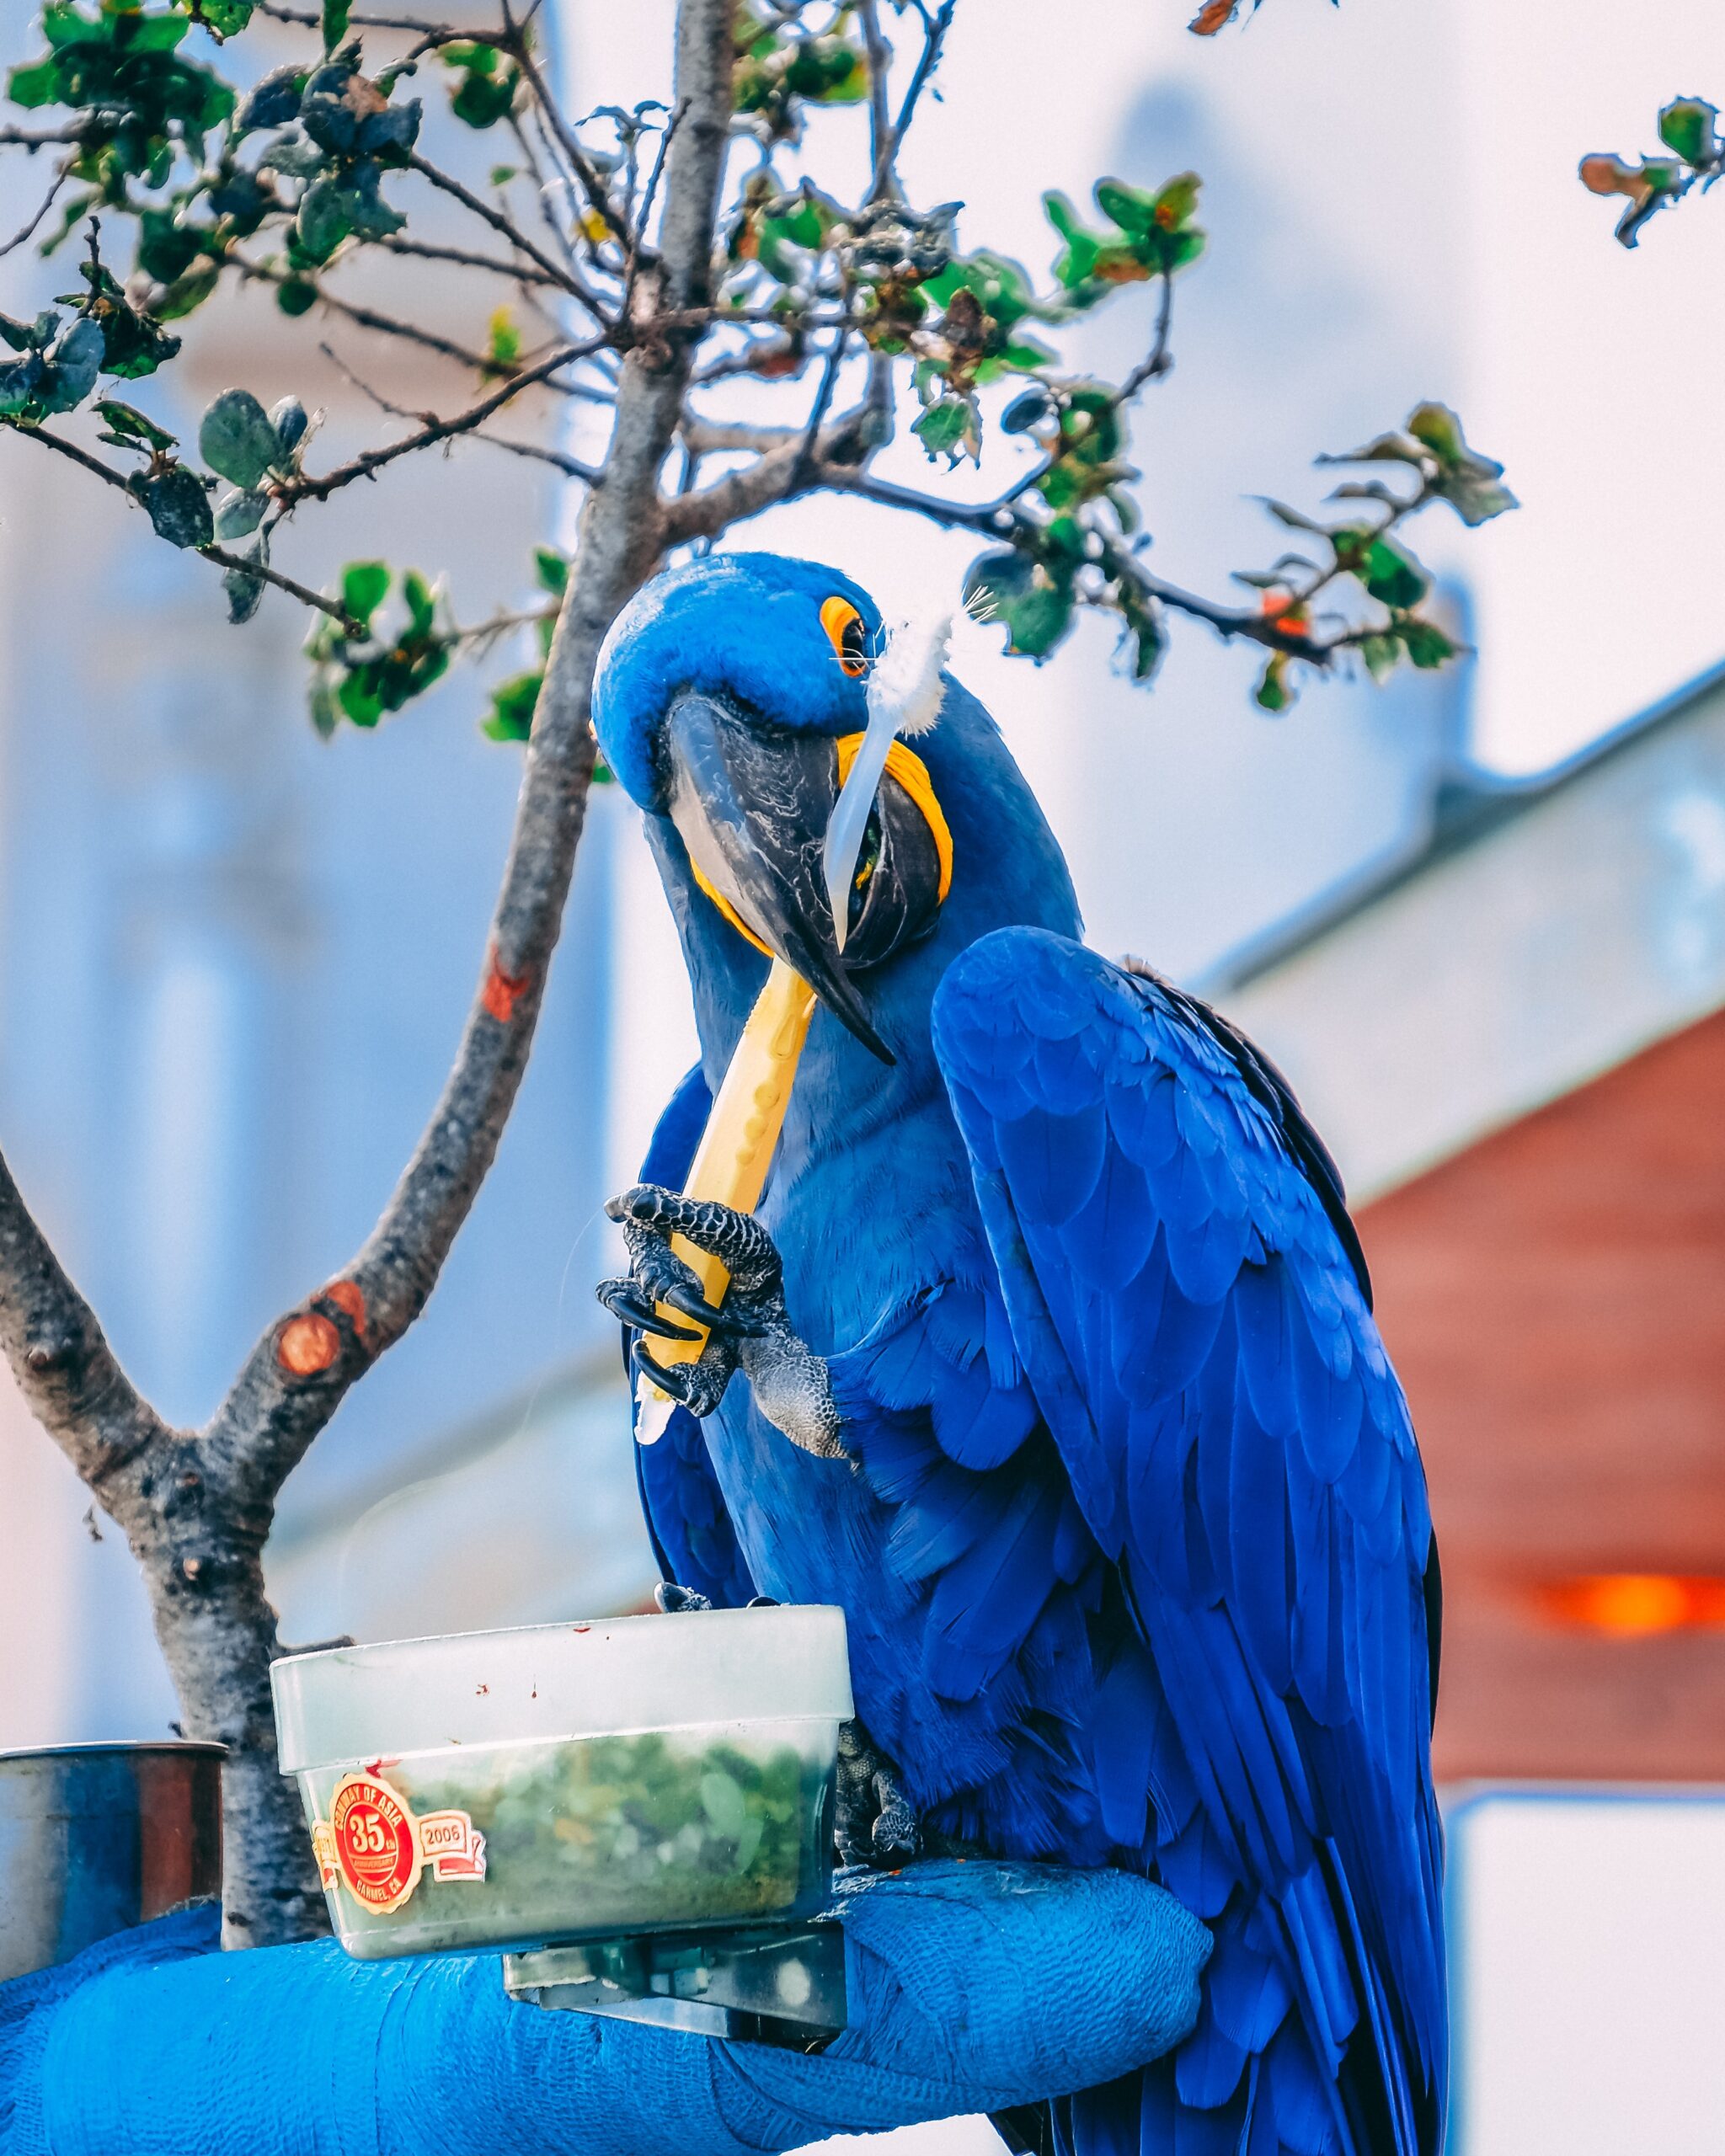 Blue parrot sitting on a blue pillow holding a toothbrush sitting in front of a clear bowl with green bird food in it.